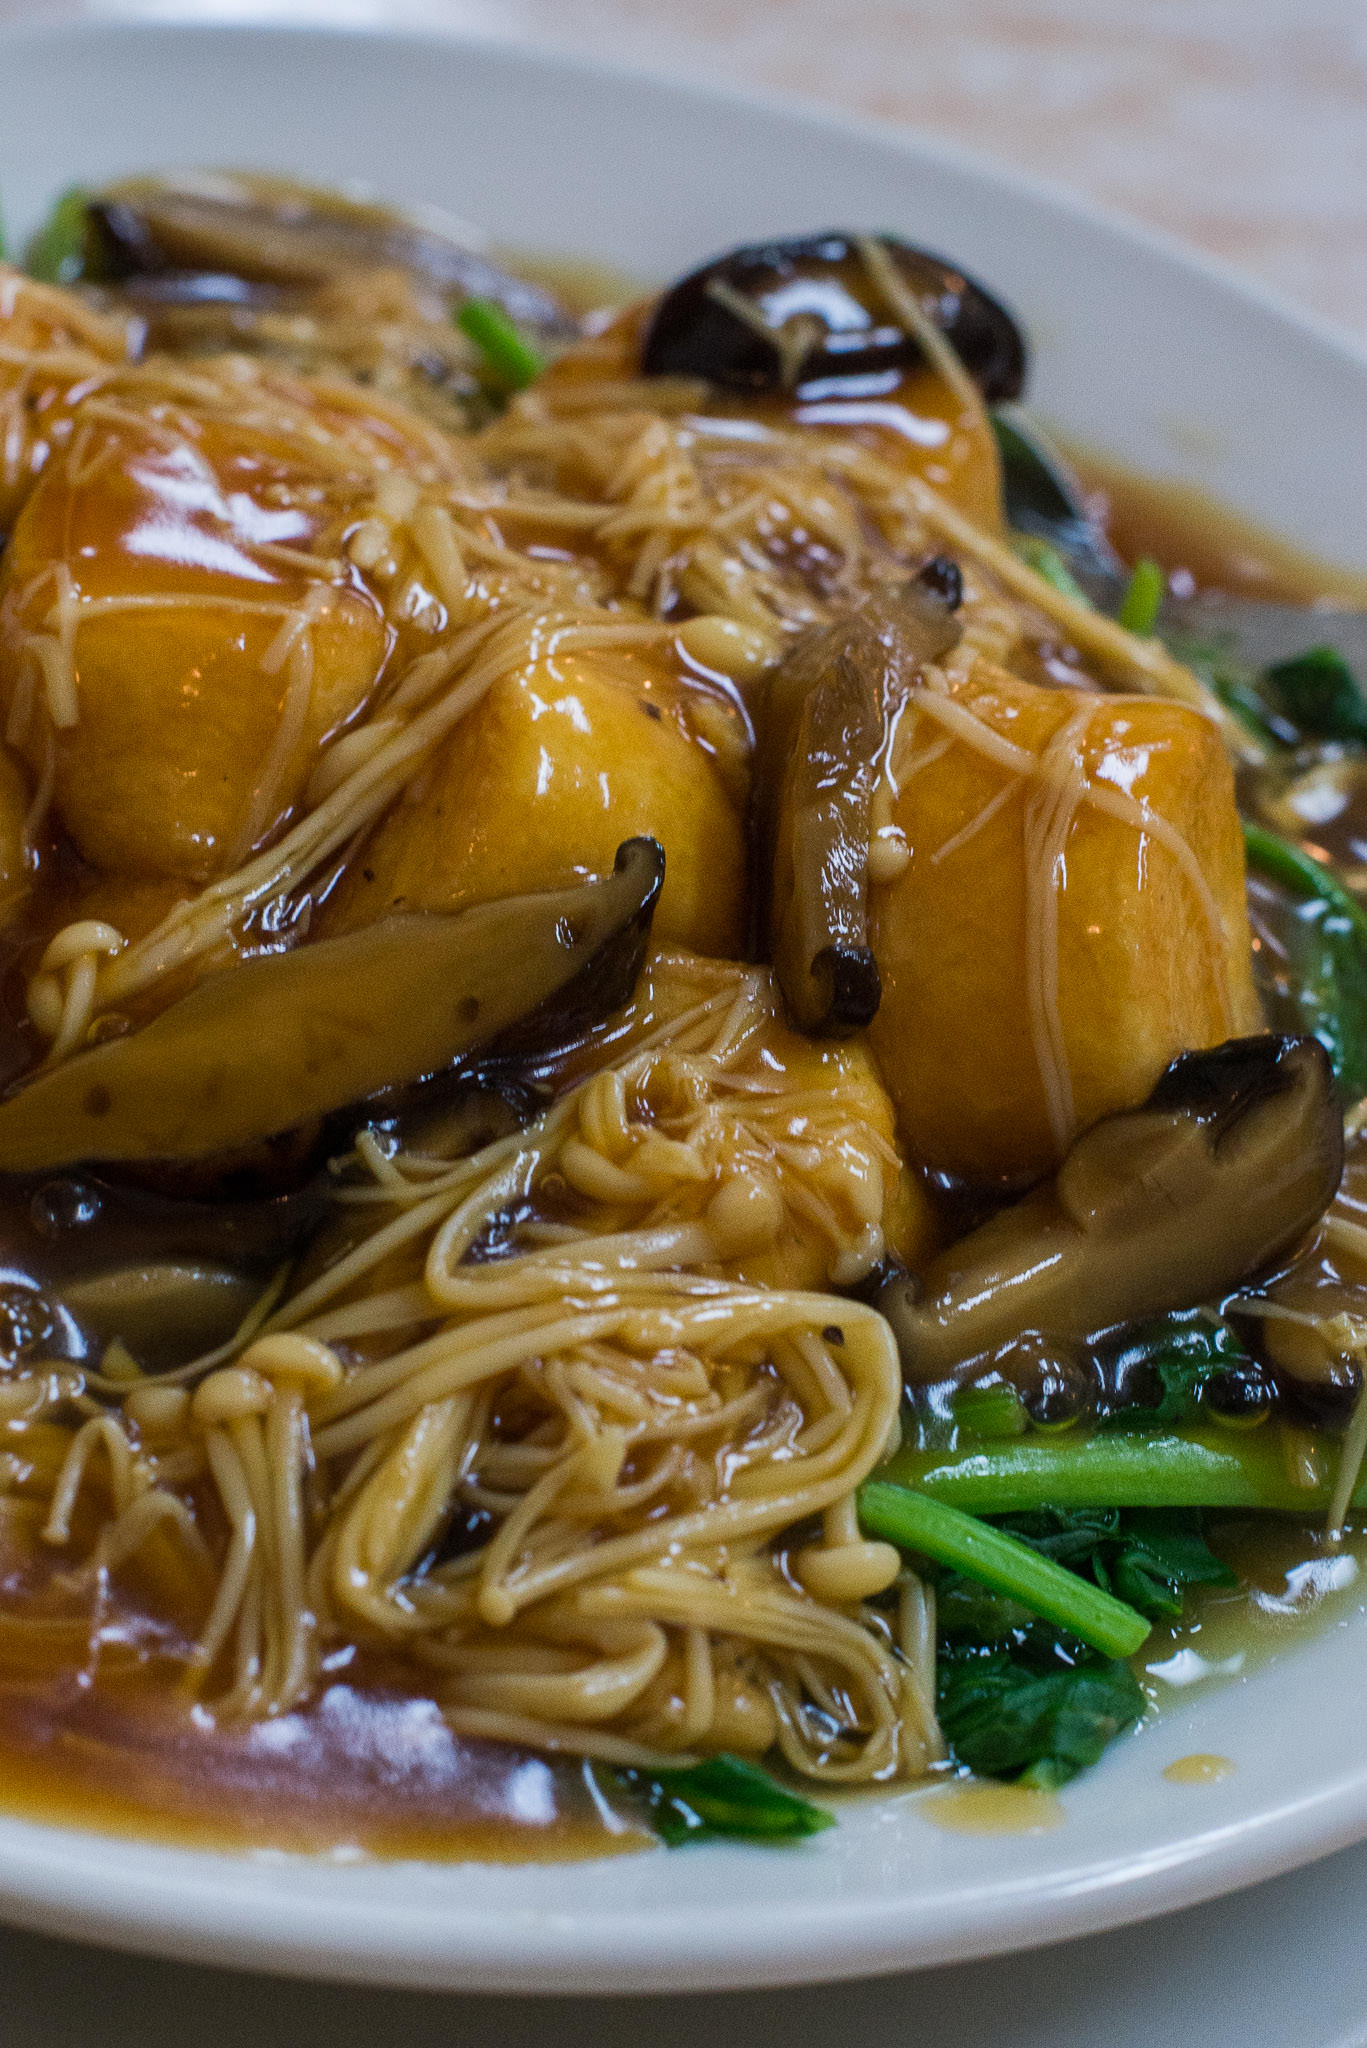 Chef's special - Japanese beancurd with mushrooms and spinach (AU$19)